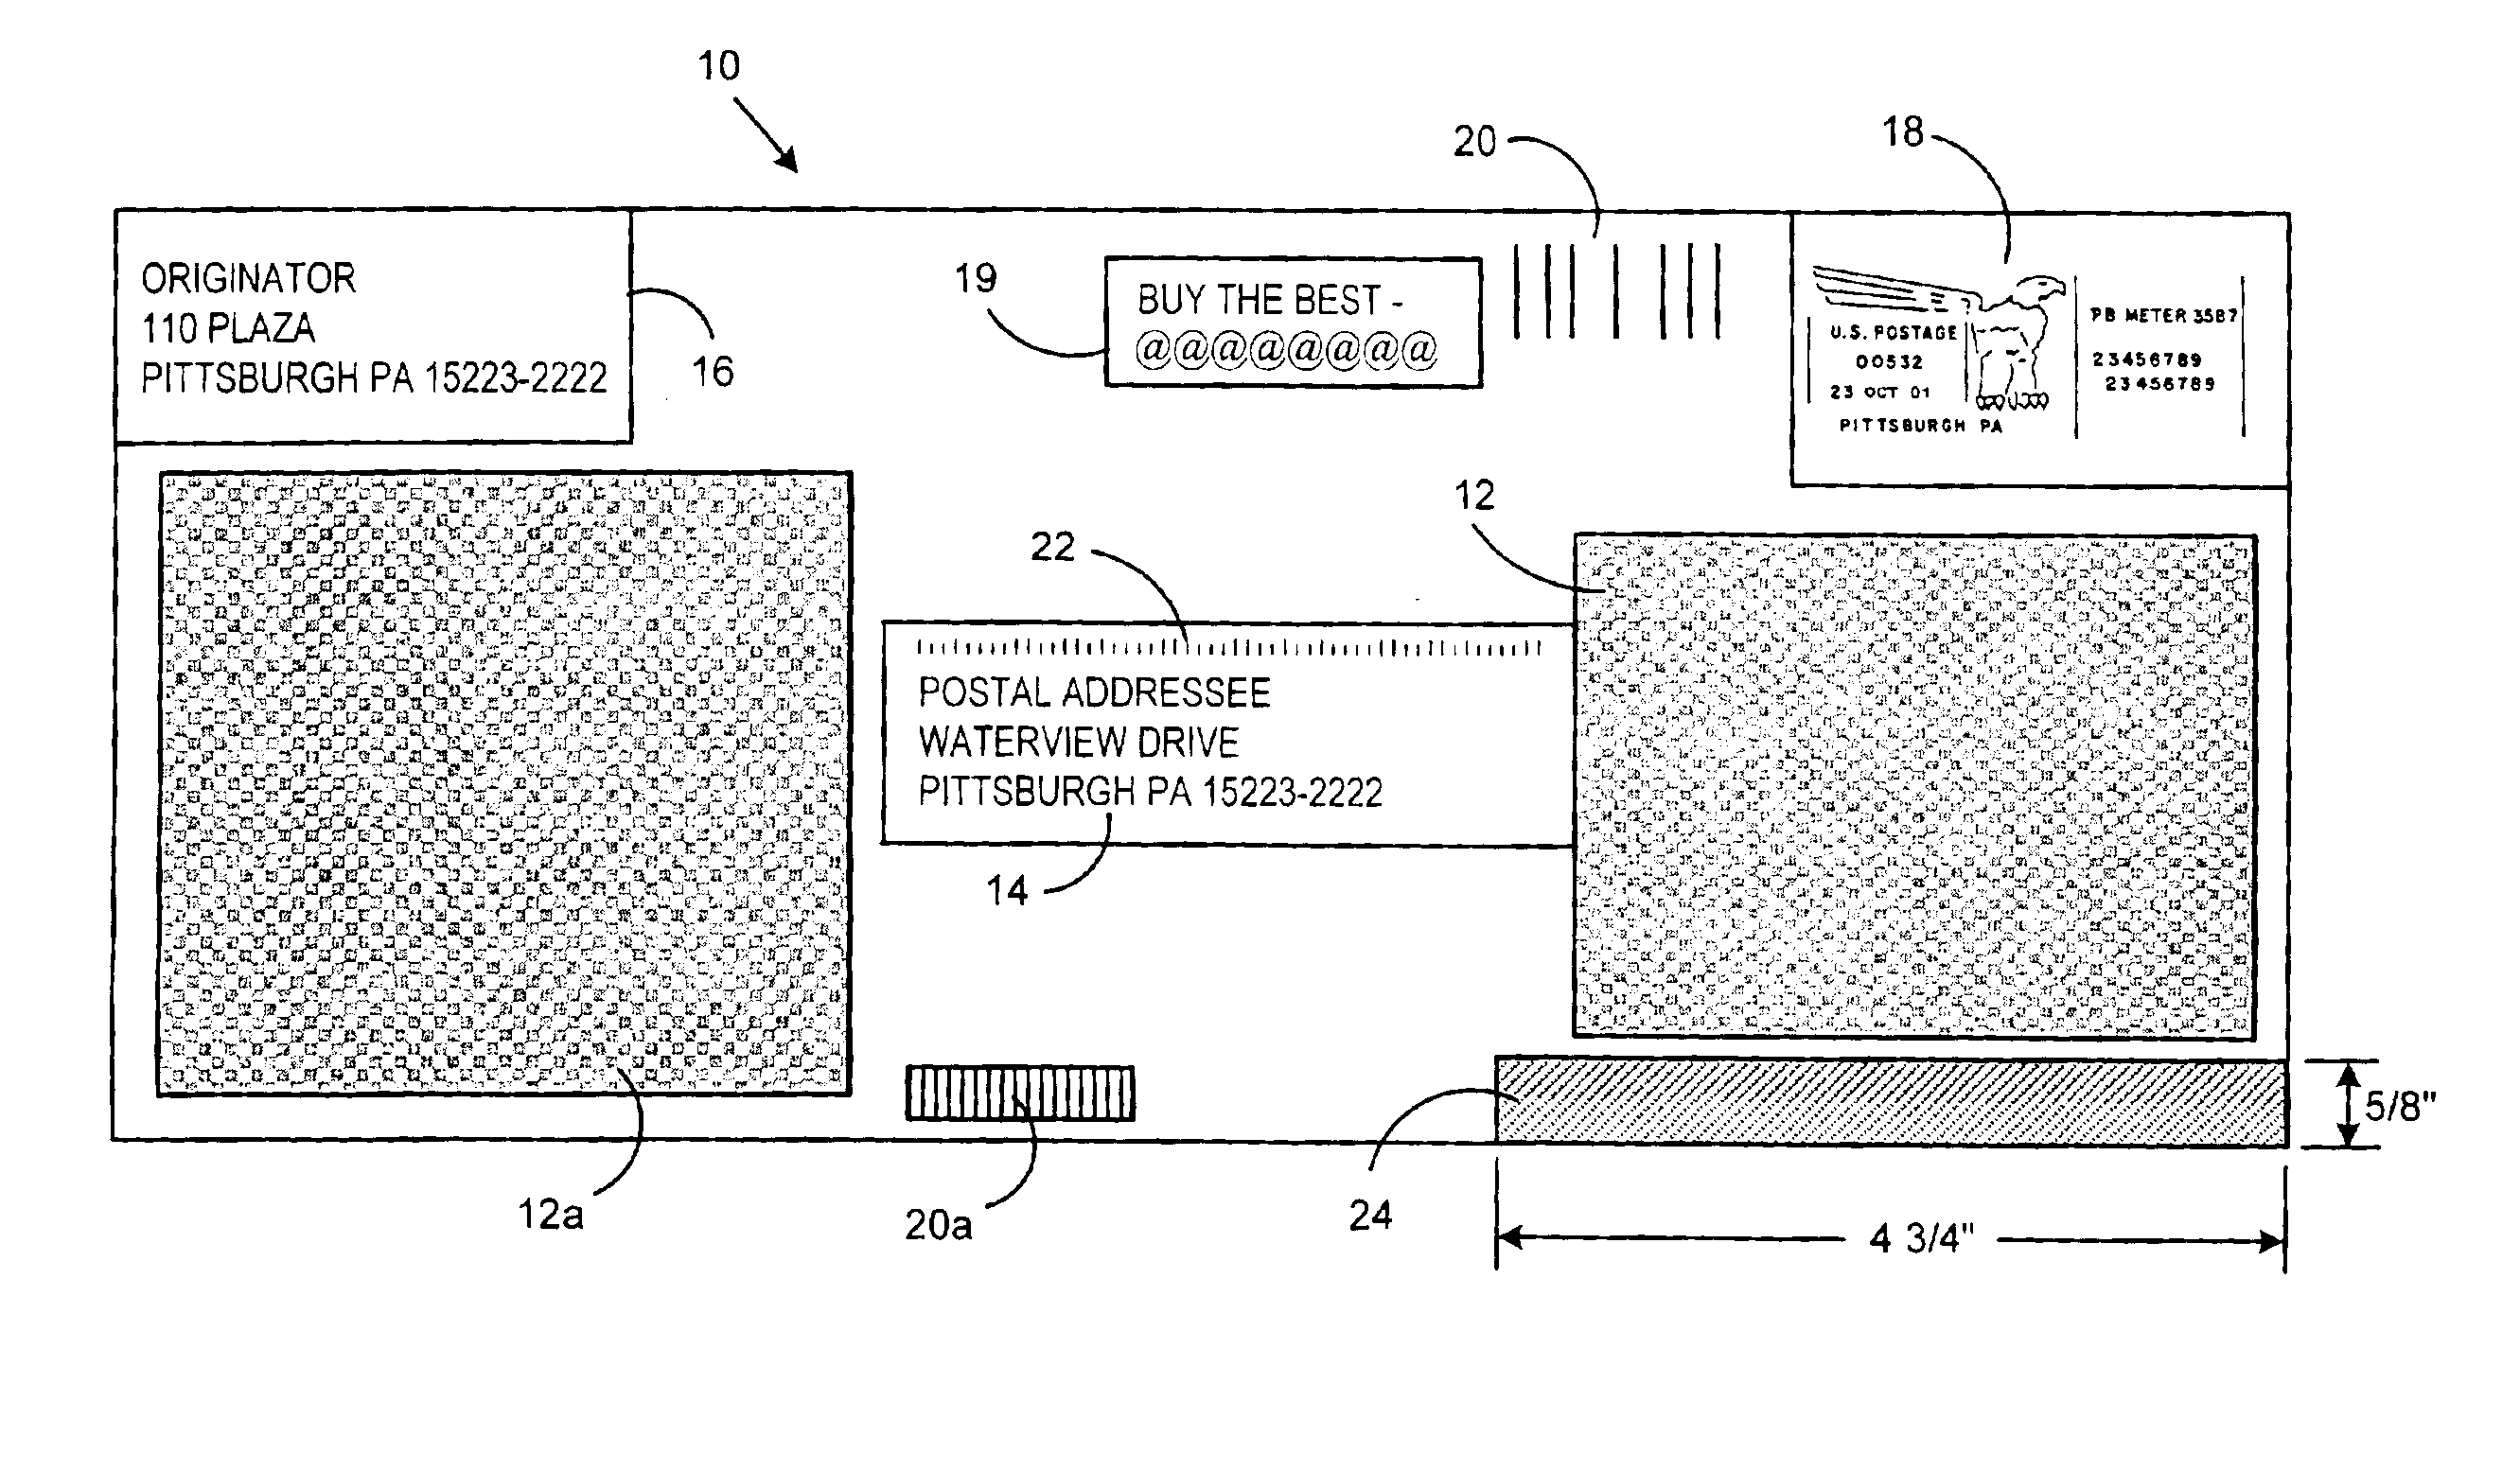 Method for improving the readability of composite images